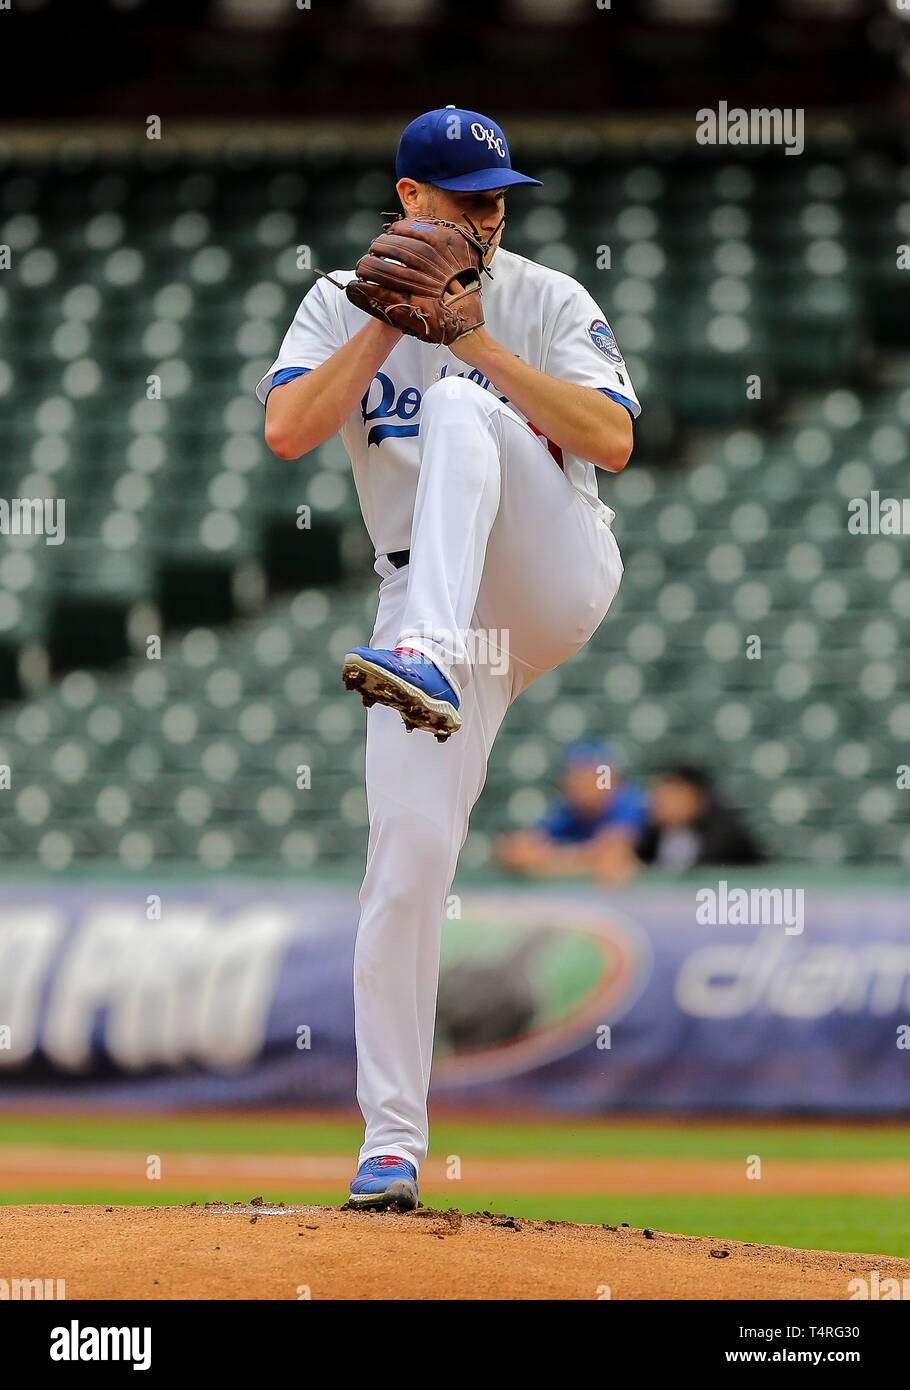 April 16, 2019: Omaha Storm Chasers pitcher Arnaldo Hernandez (52) during a  baseball game between the Omaha Storm Chasers and the Oklahoma City Dodgers  at Chickasaw Bricktown Ballpark in Oklahoma City, OK.